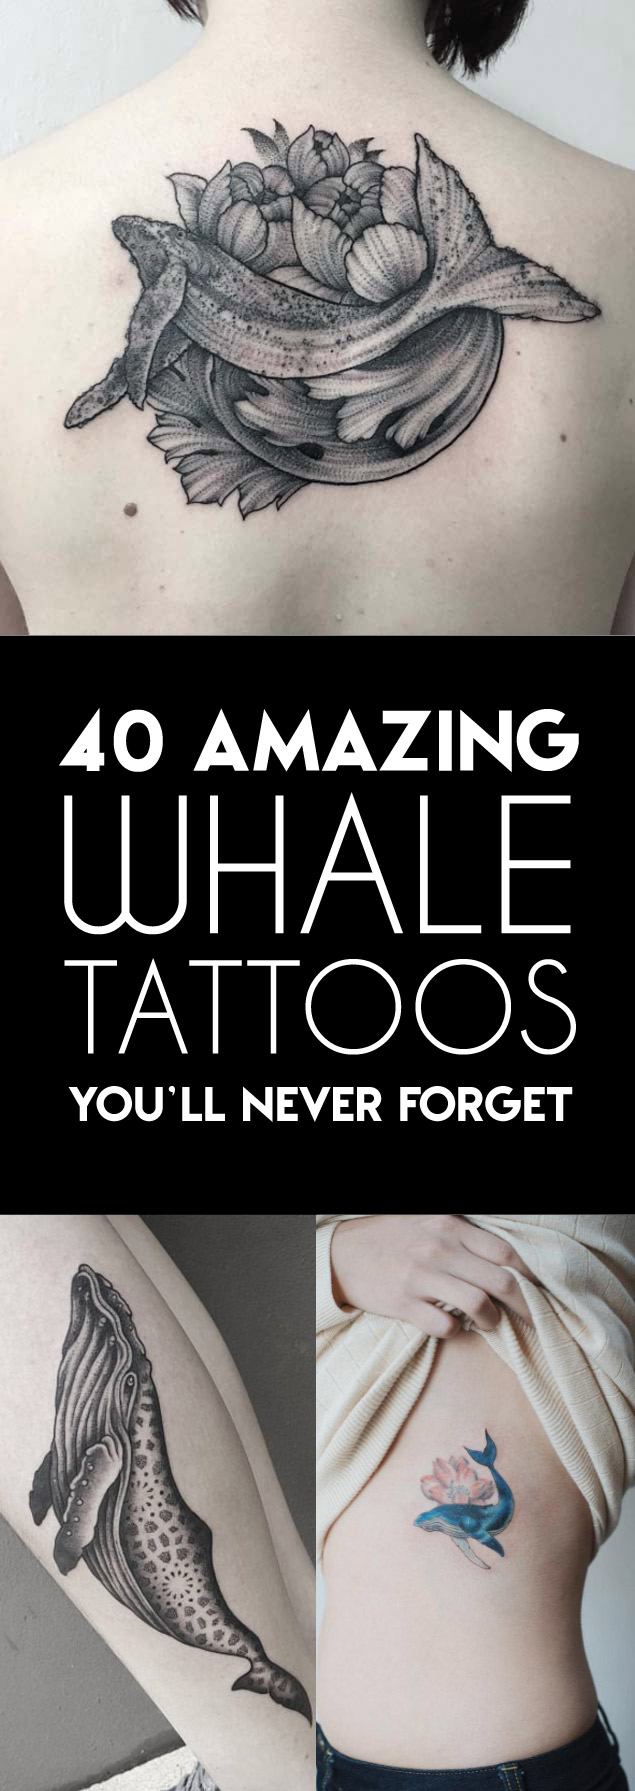 40+ Amazing Whale Tattoos You'll Never Forget - TattooBlend